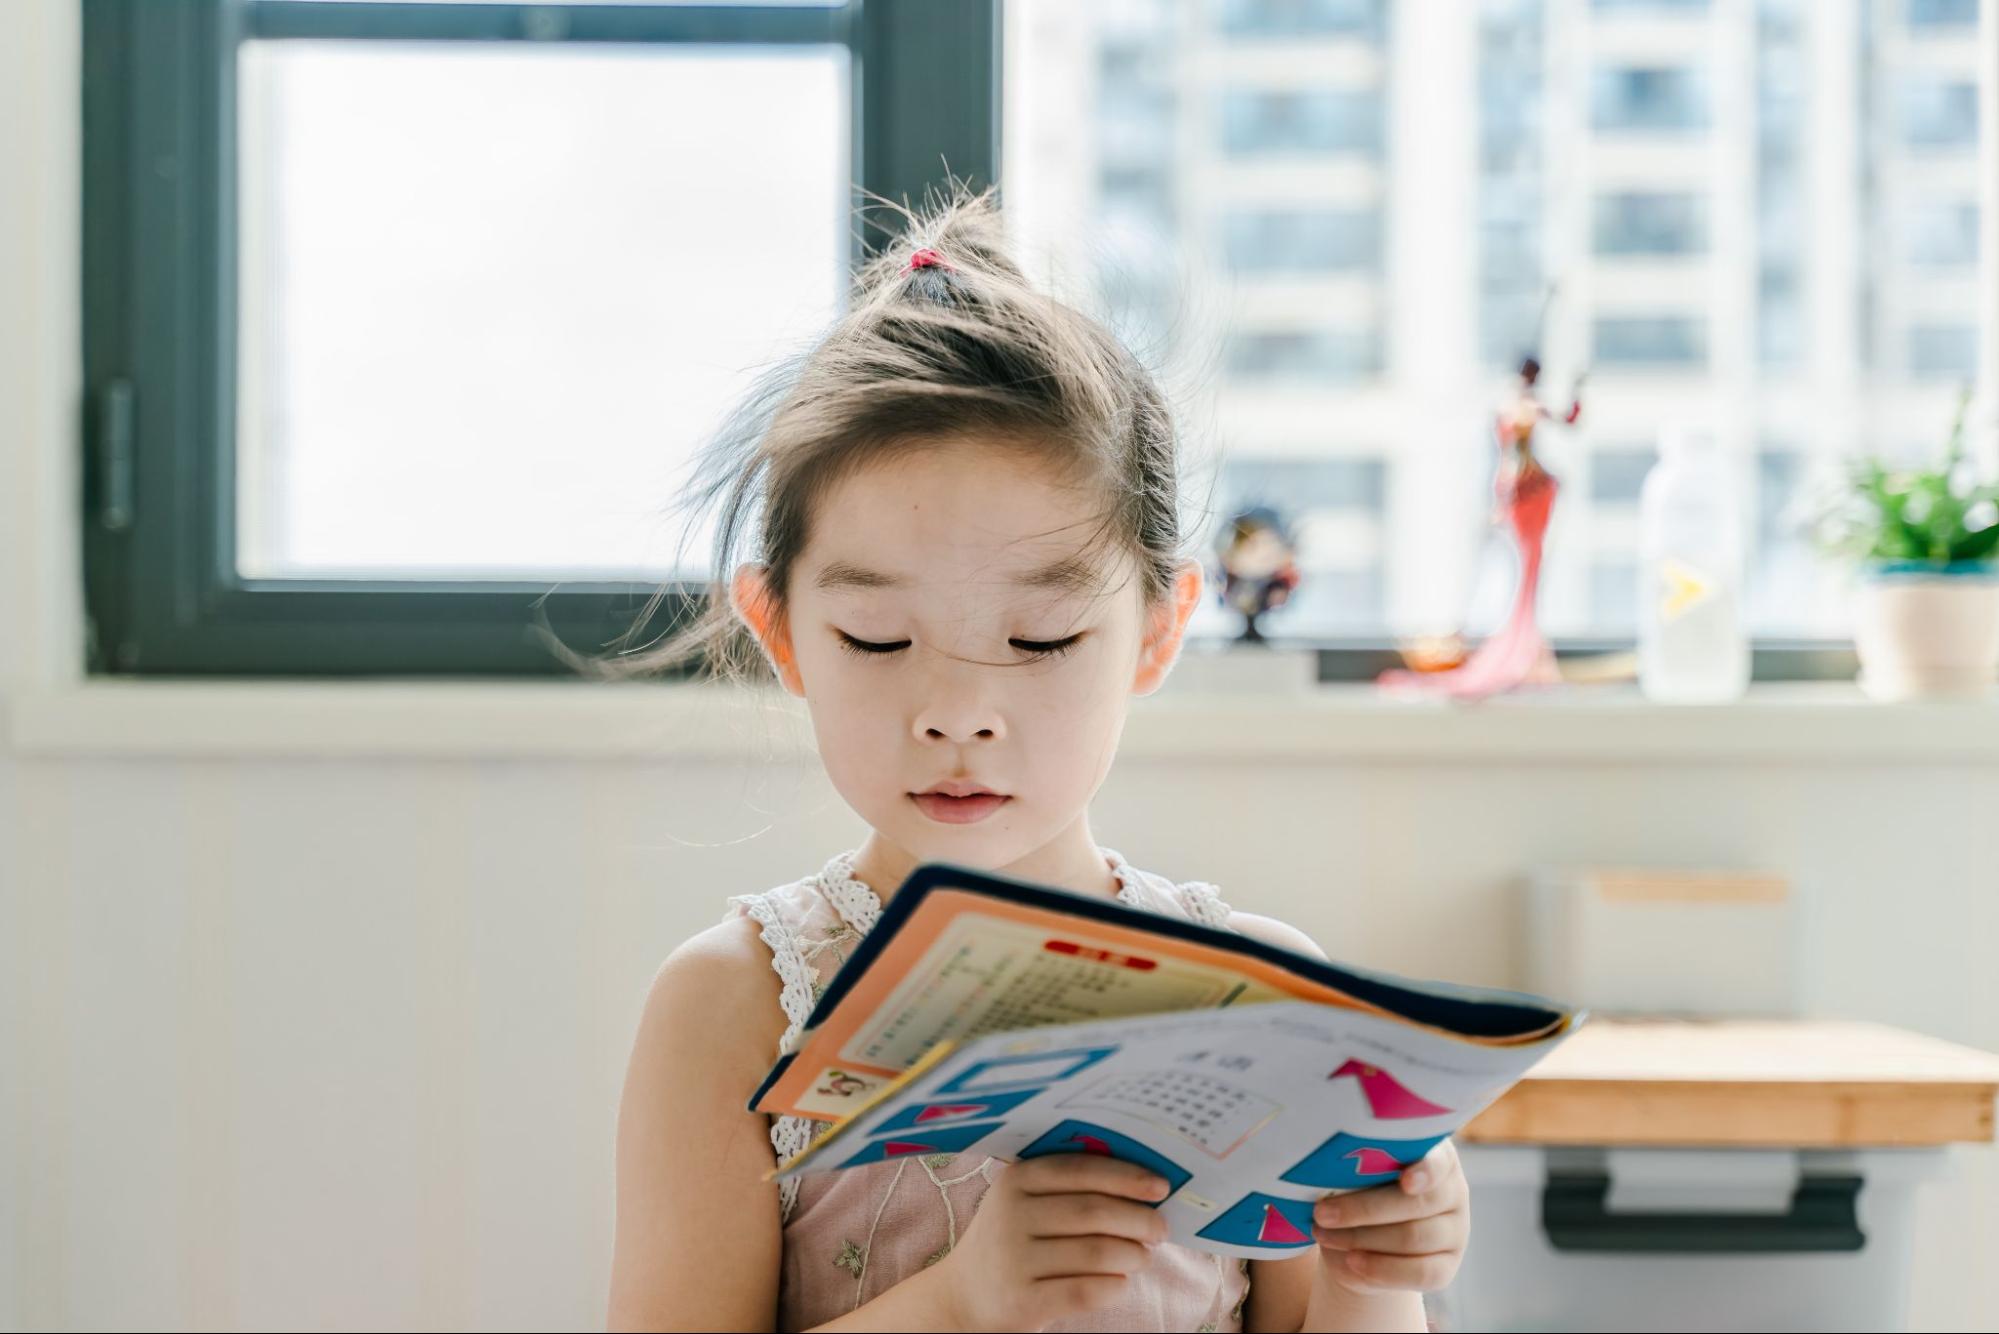 A young girl reading a book at school